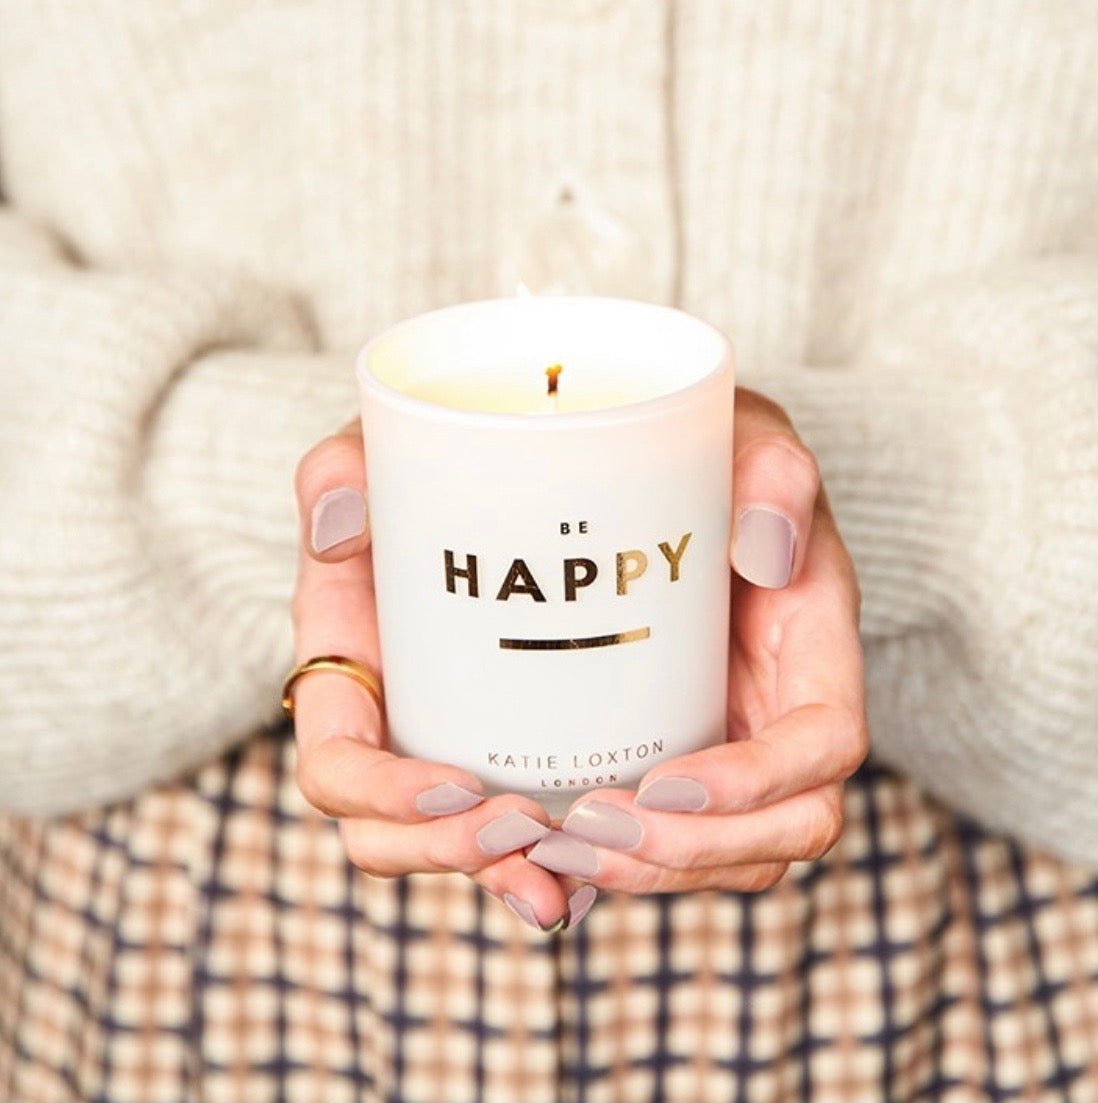 Top Five Gifts for a Hygge Home